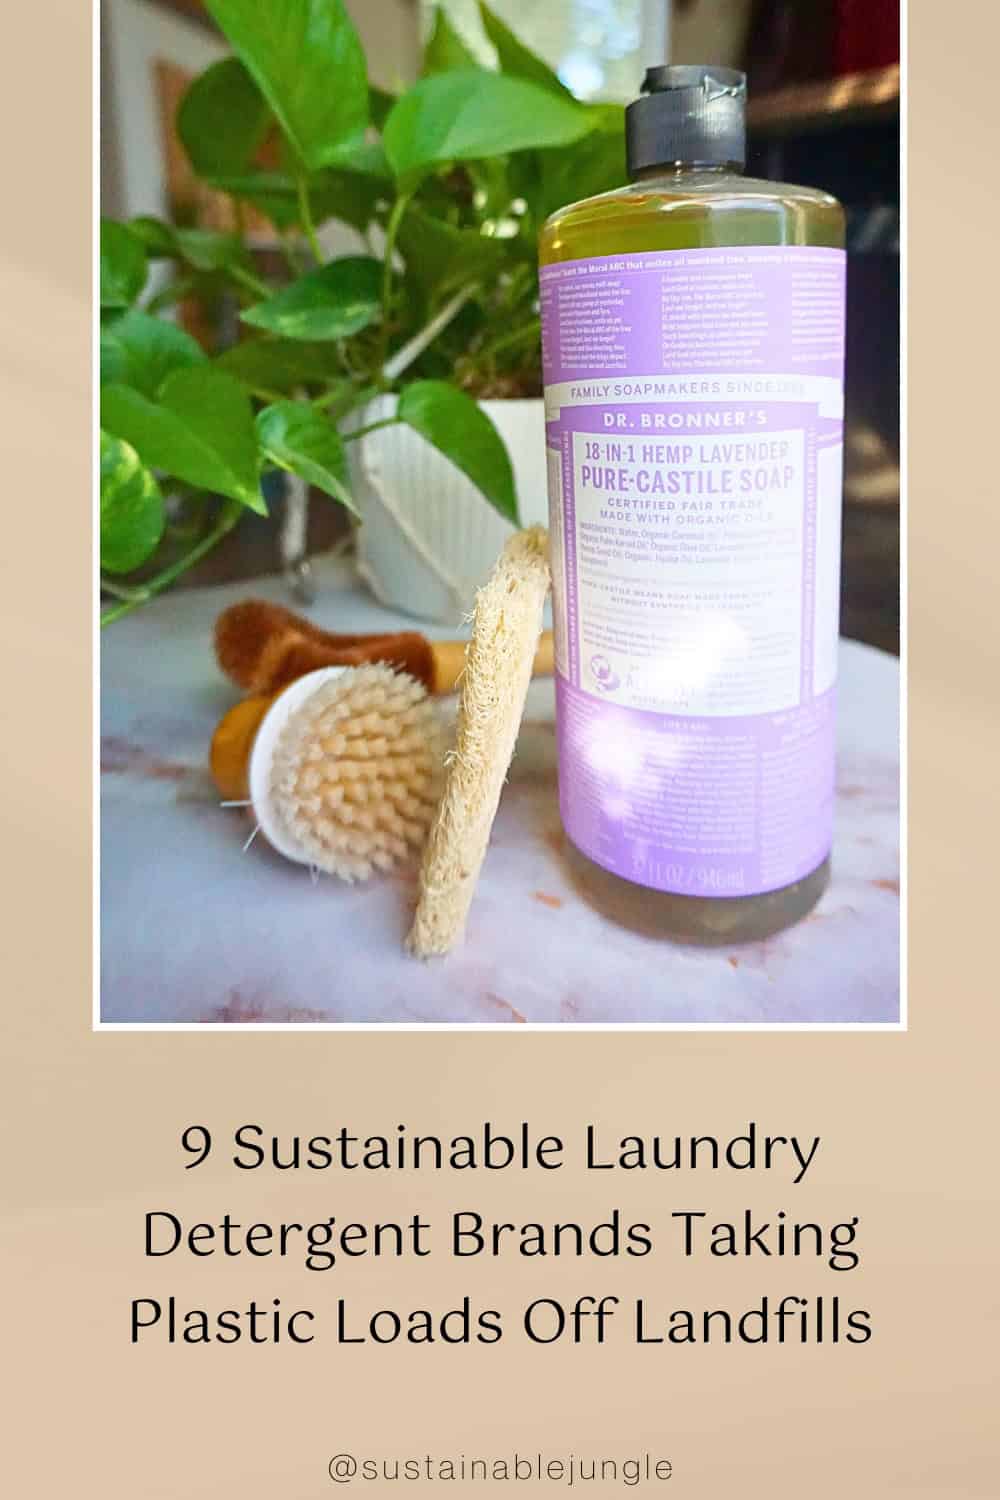 9 Sustainable Laundry Detergent Brands Taking Plastic Loads Off Landfills Image by Sustainable Jungle #sustainablelaundrydetergent #bestsustainablelaundrydetergent #zerowastelaundrydetergent #plasticfreelaundrydetergent #PVAfreelaundrydetergent #zerowastedetergent #sustainablejungle